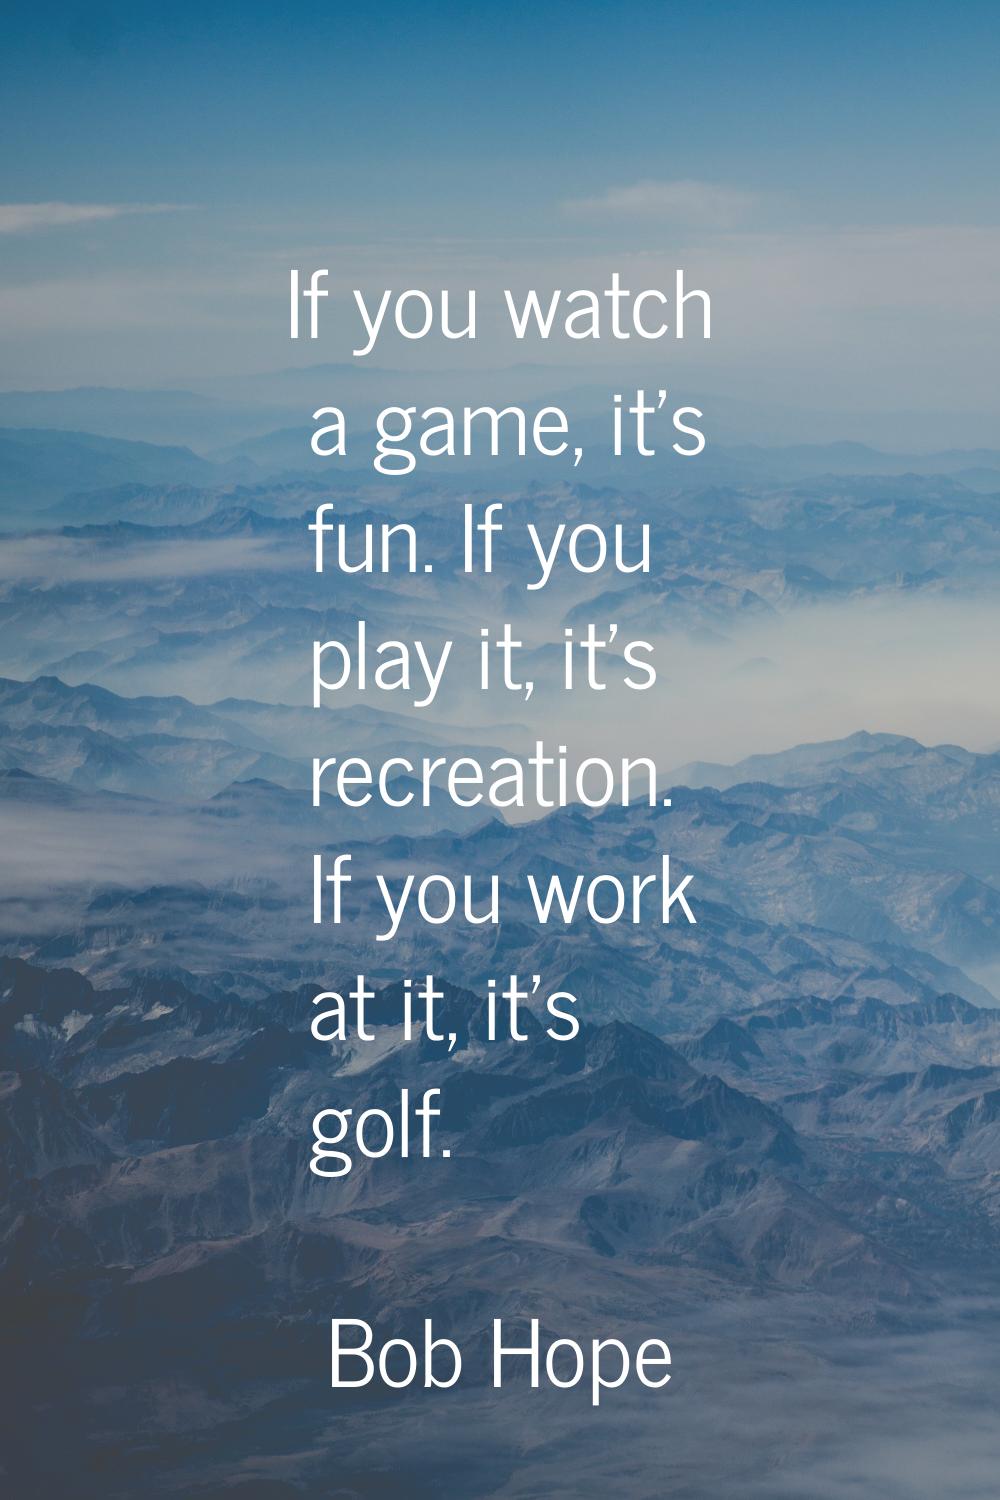 If you watch a game, it's fun. If you play it, it's recreation. If you work at it, it's golf.